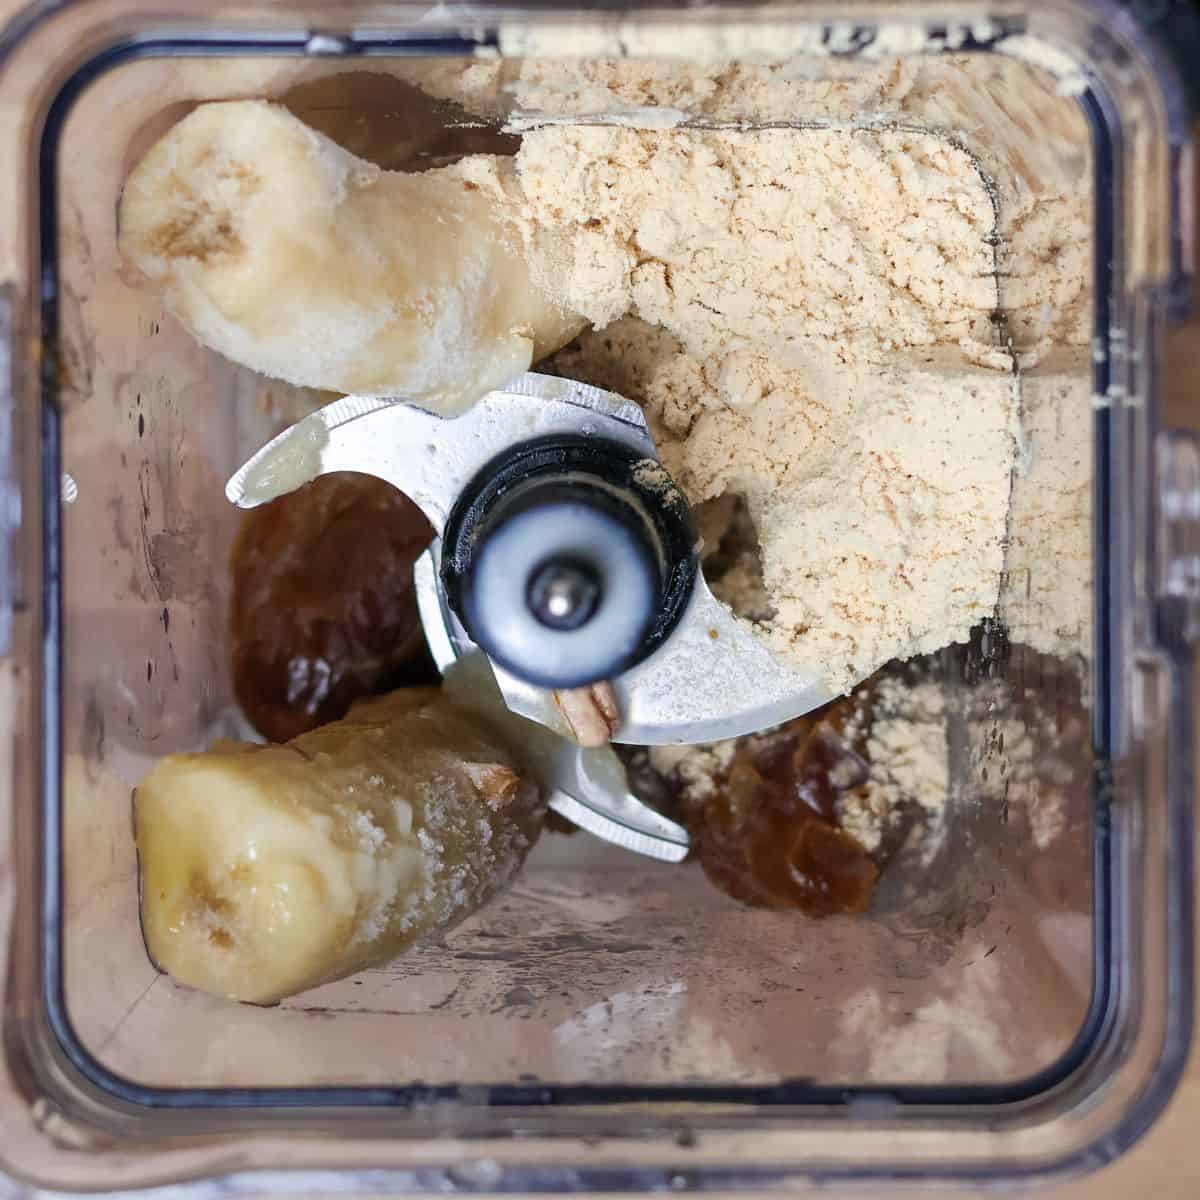 Top view of a blender filled with ingredients for a Hulk smoothie copycat recipe, including frozen bananas, pecans, vanilla protein powder, and dates before blending.